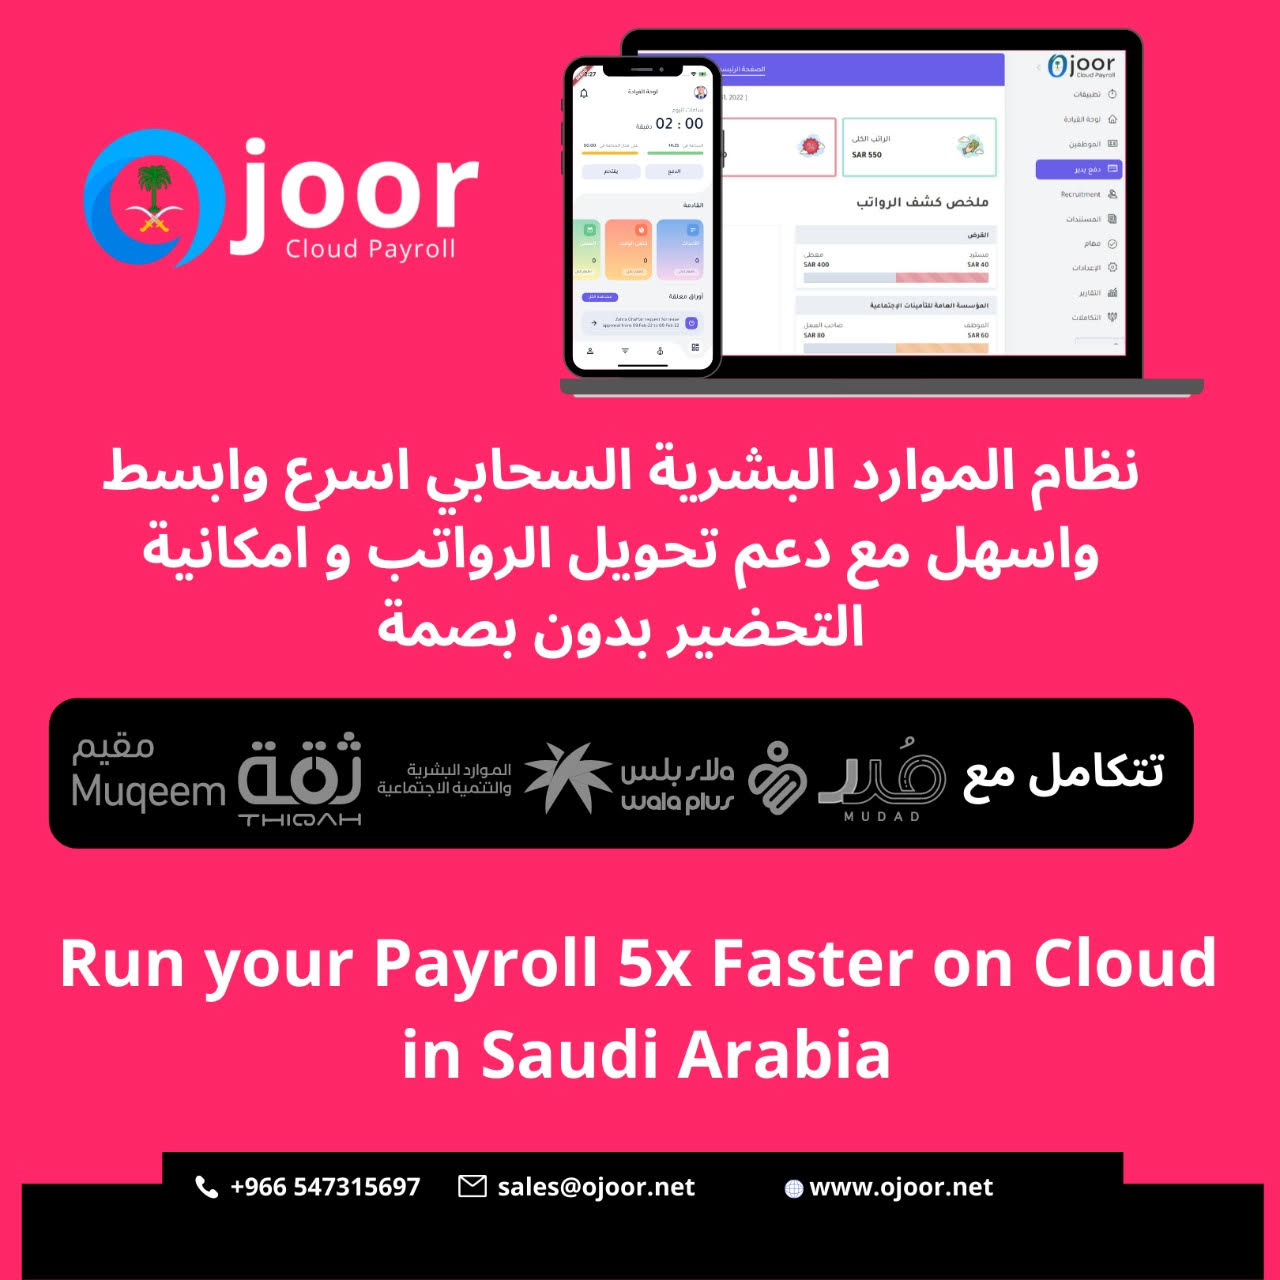 How to drive growth using Payroll Software in Saudi?